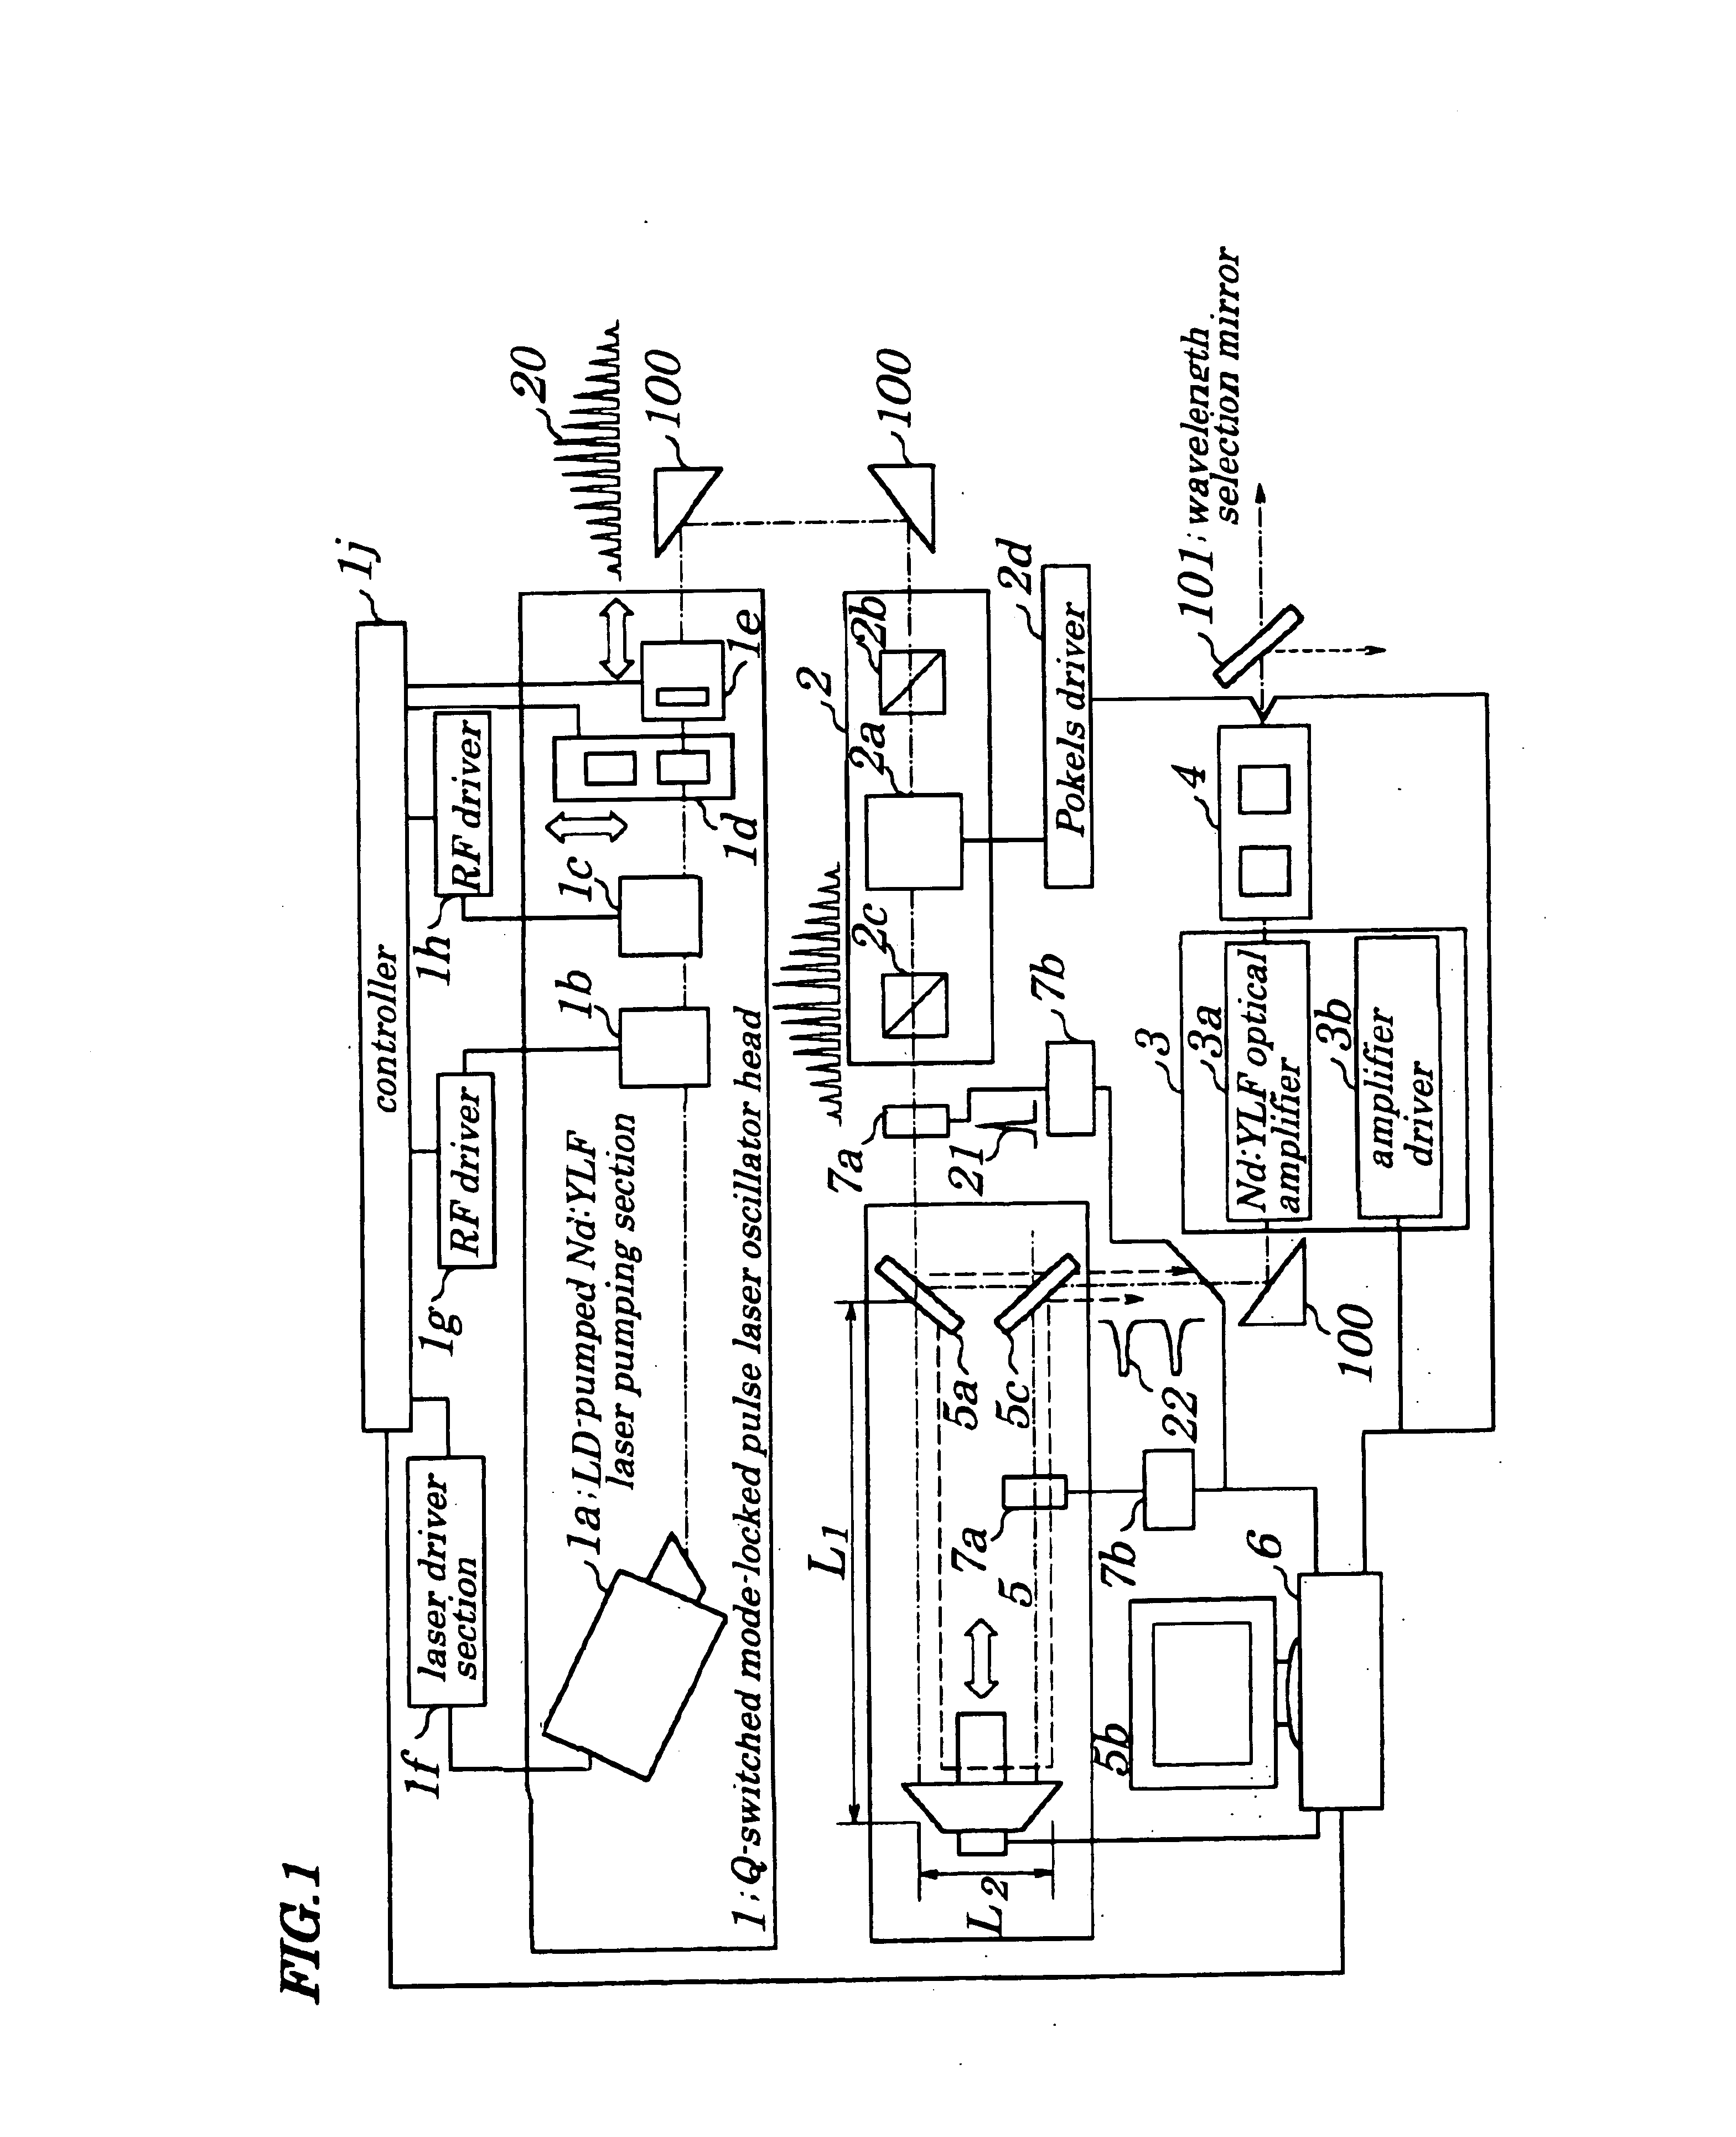 Method and apparatus for performing pattern defect repair using Q-switched mode-locked pulse laser